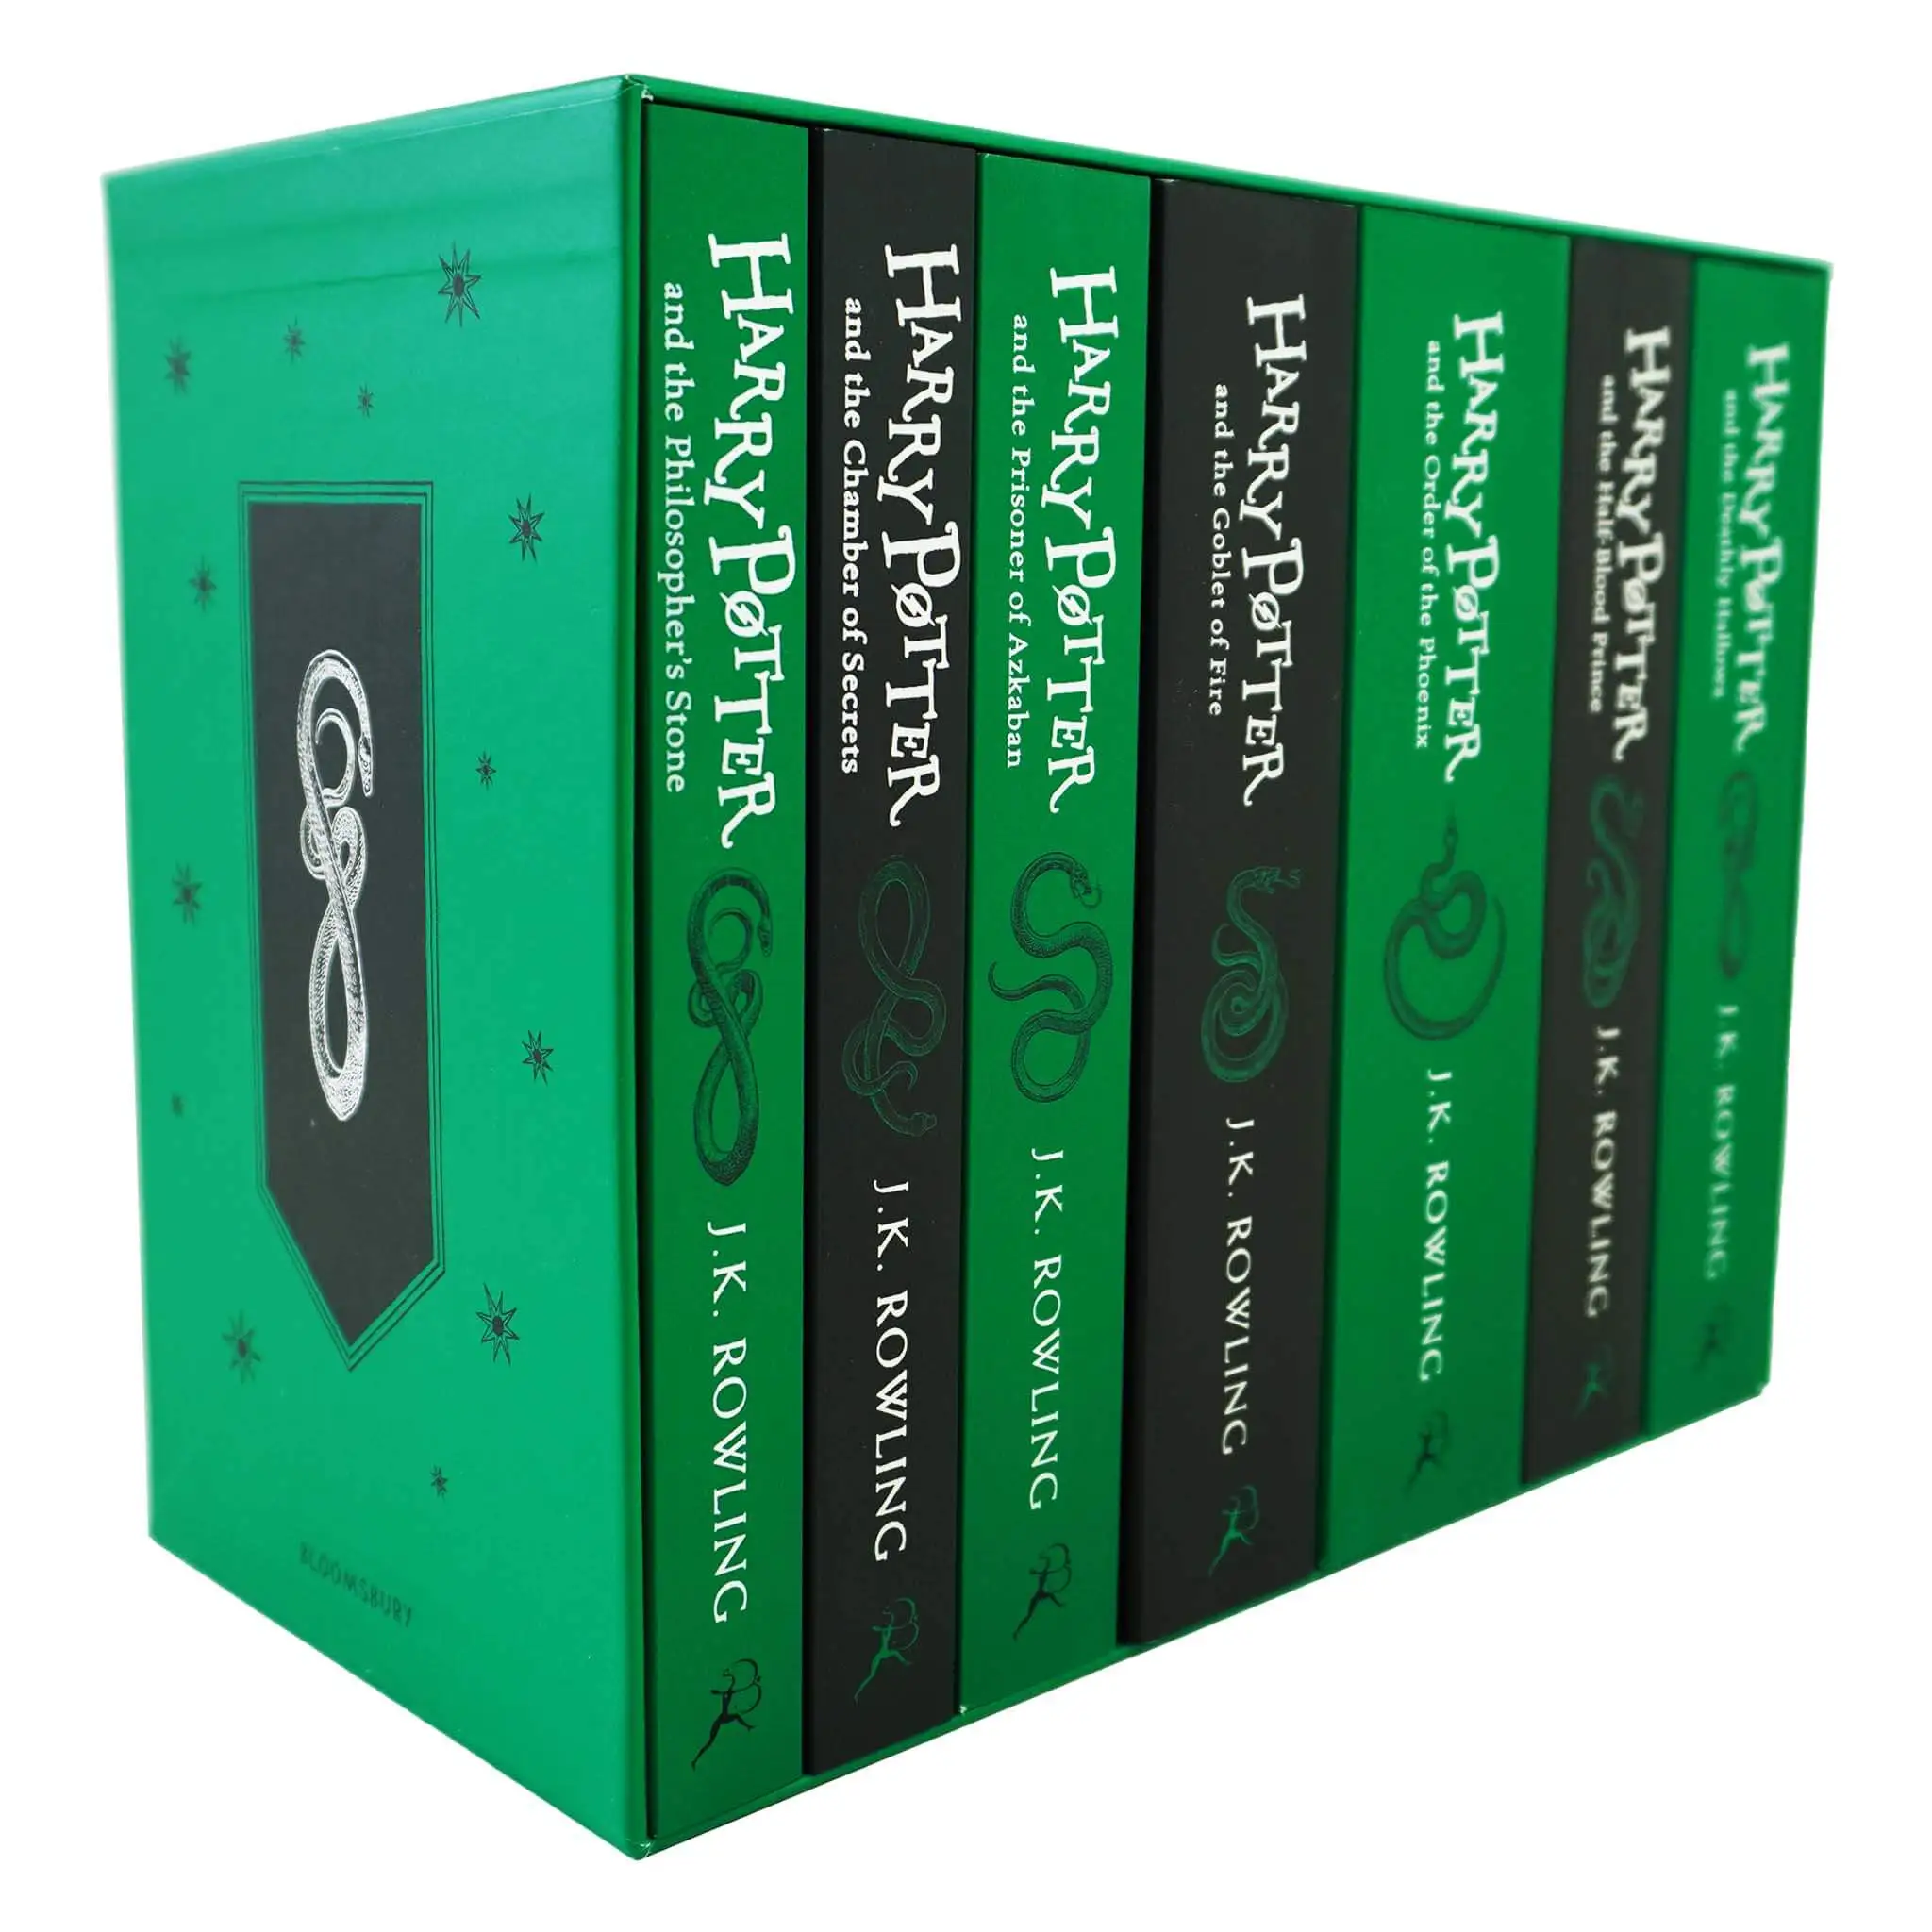 Harry Potter: Hogwarts House Editions - Slytherin 7 Books Box Set by J.K. Rowling - Ages 9+ - Paperback 1